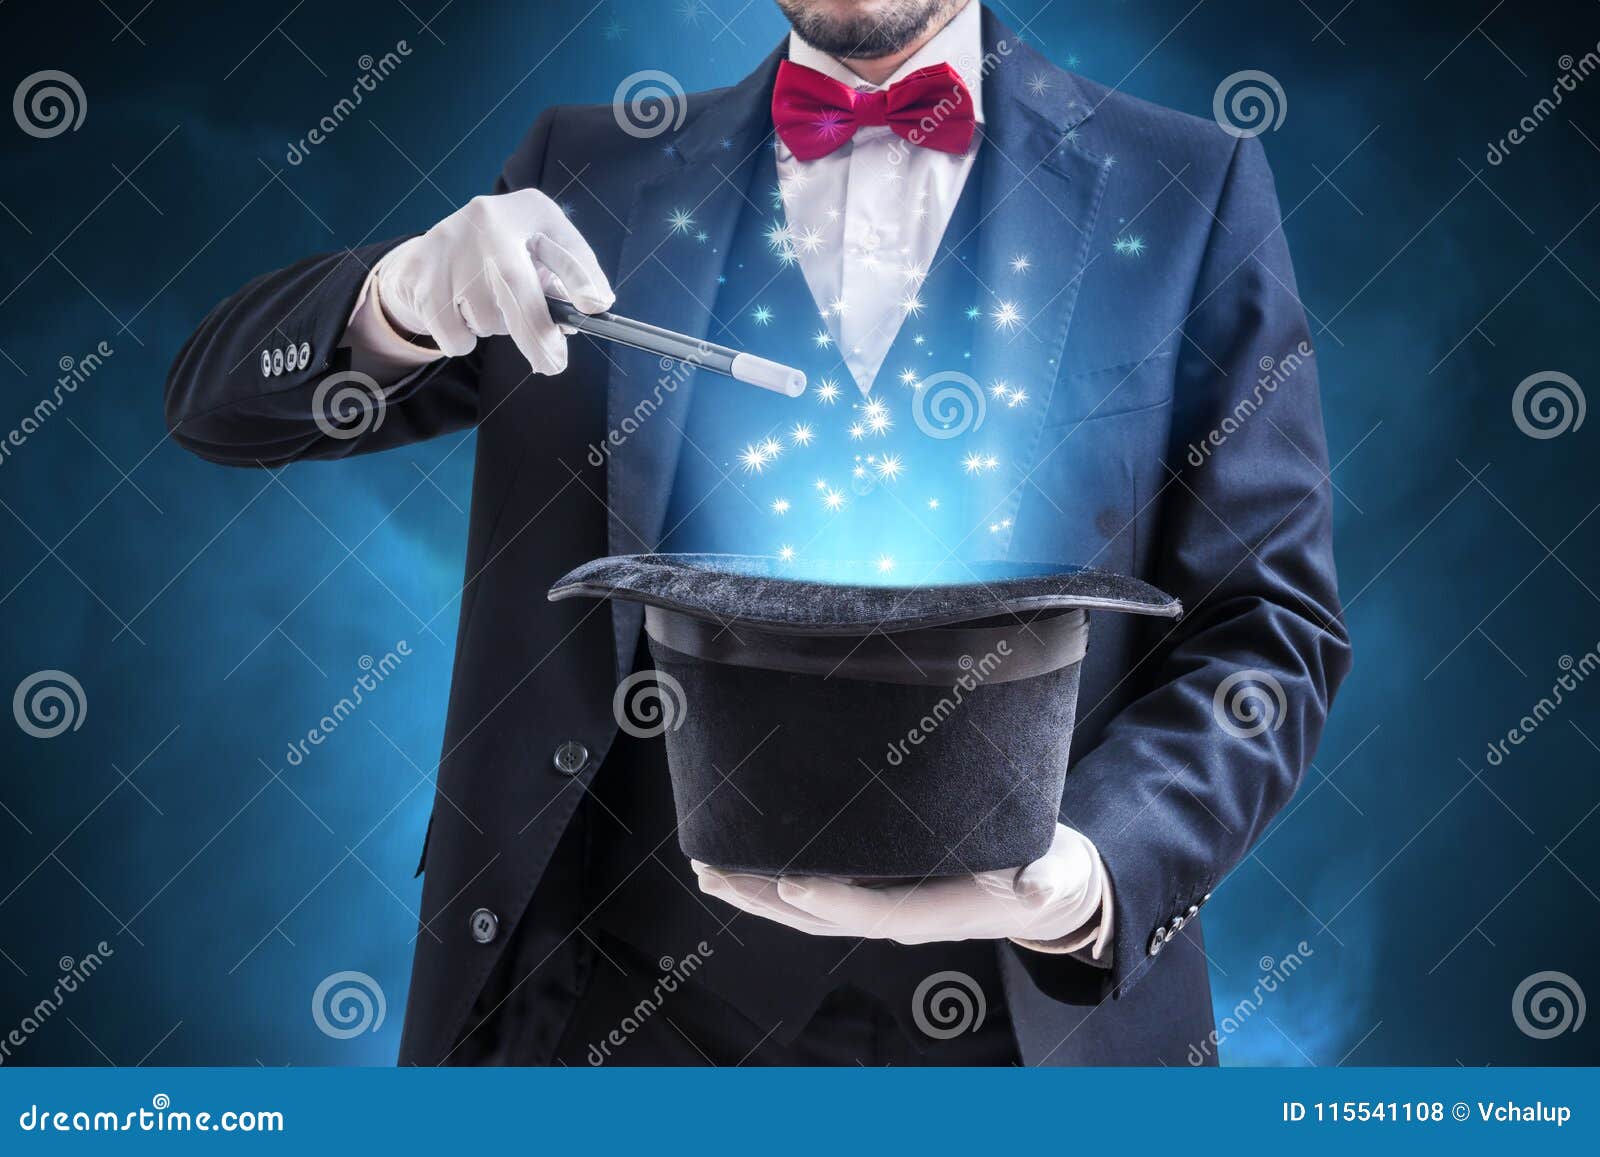 magician or illusionist is showing magic trick. blue stage light in background